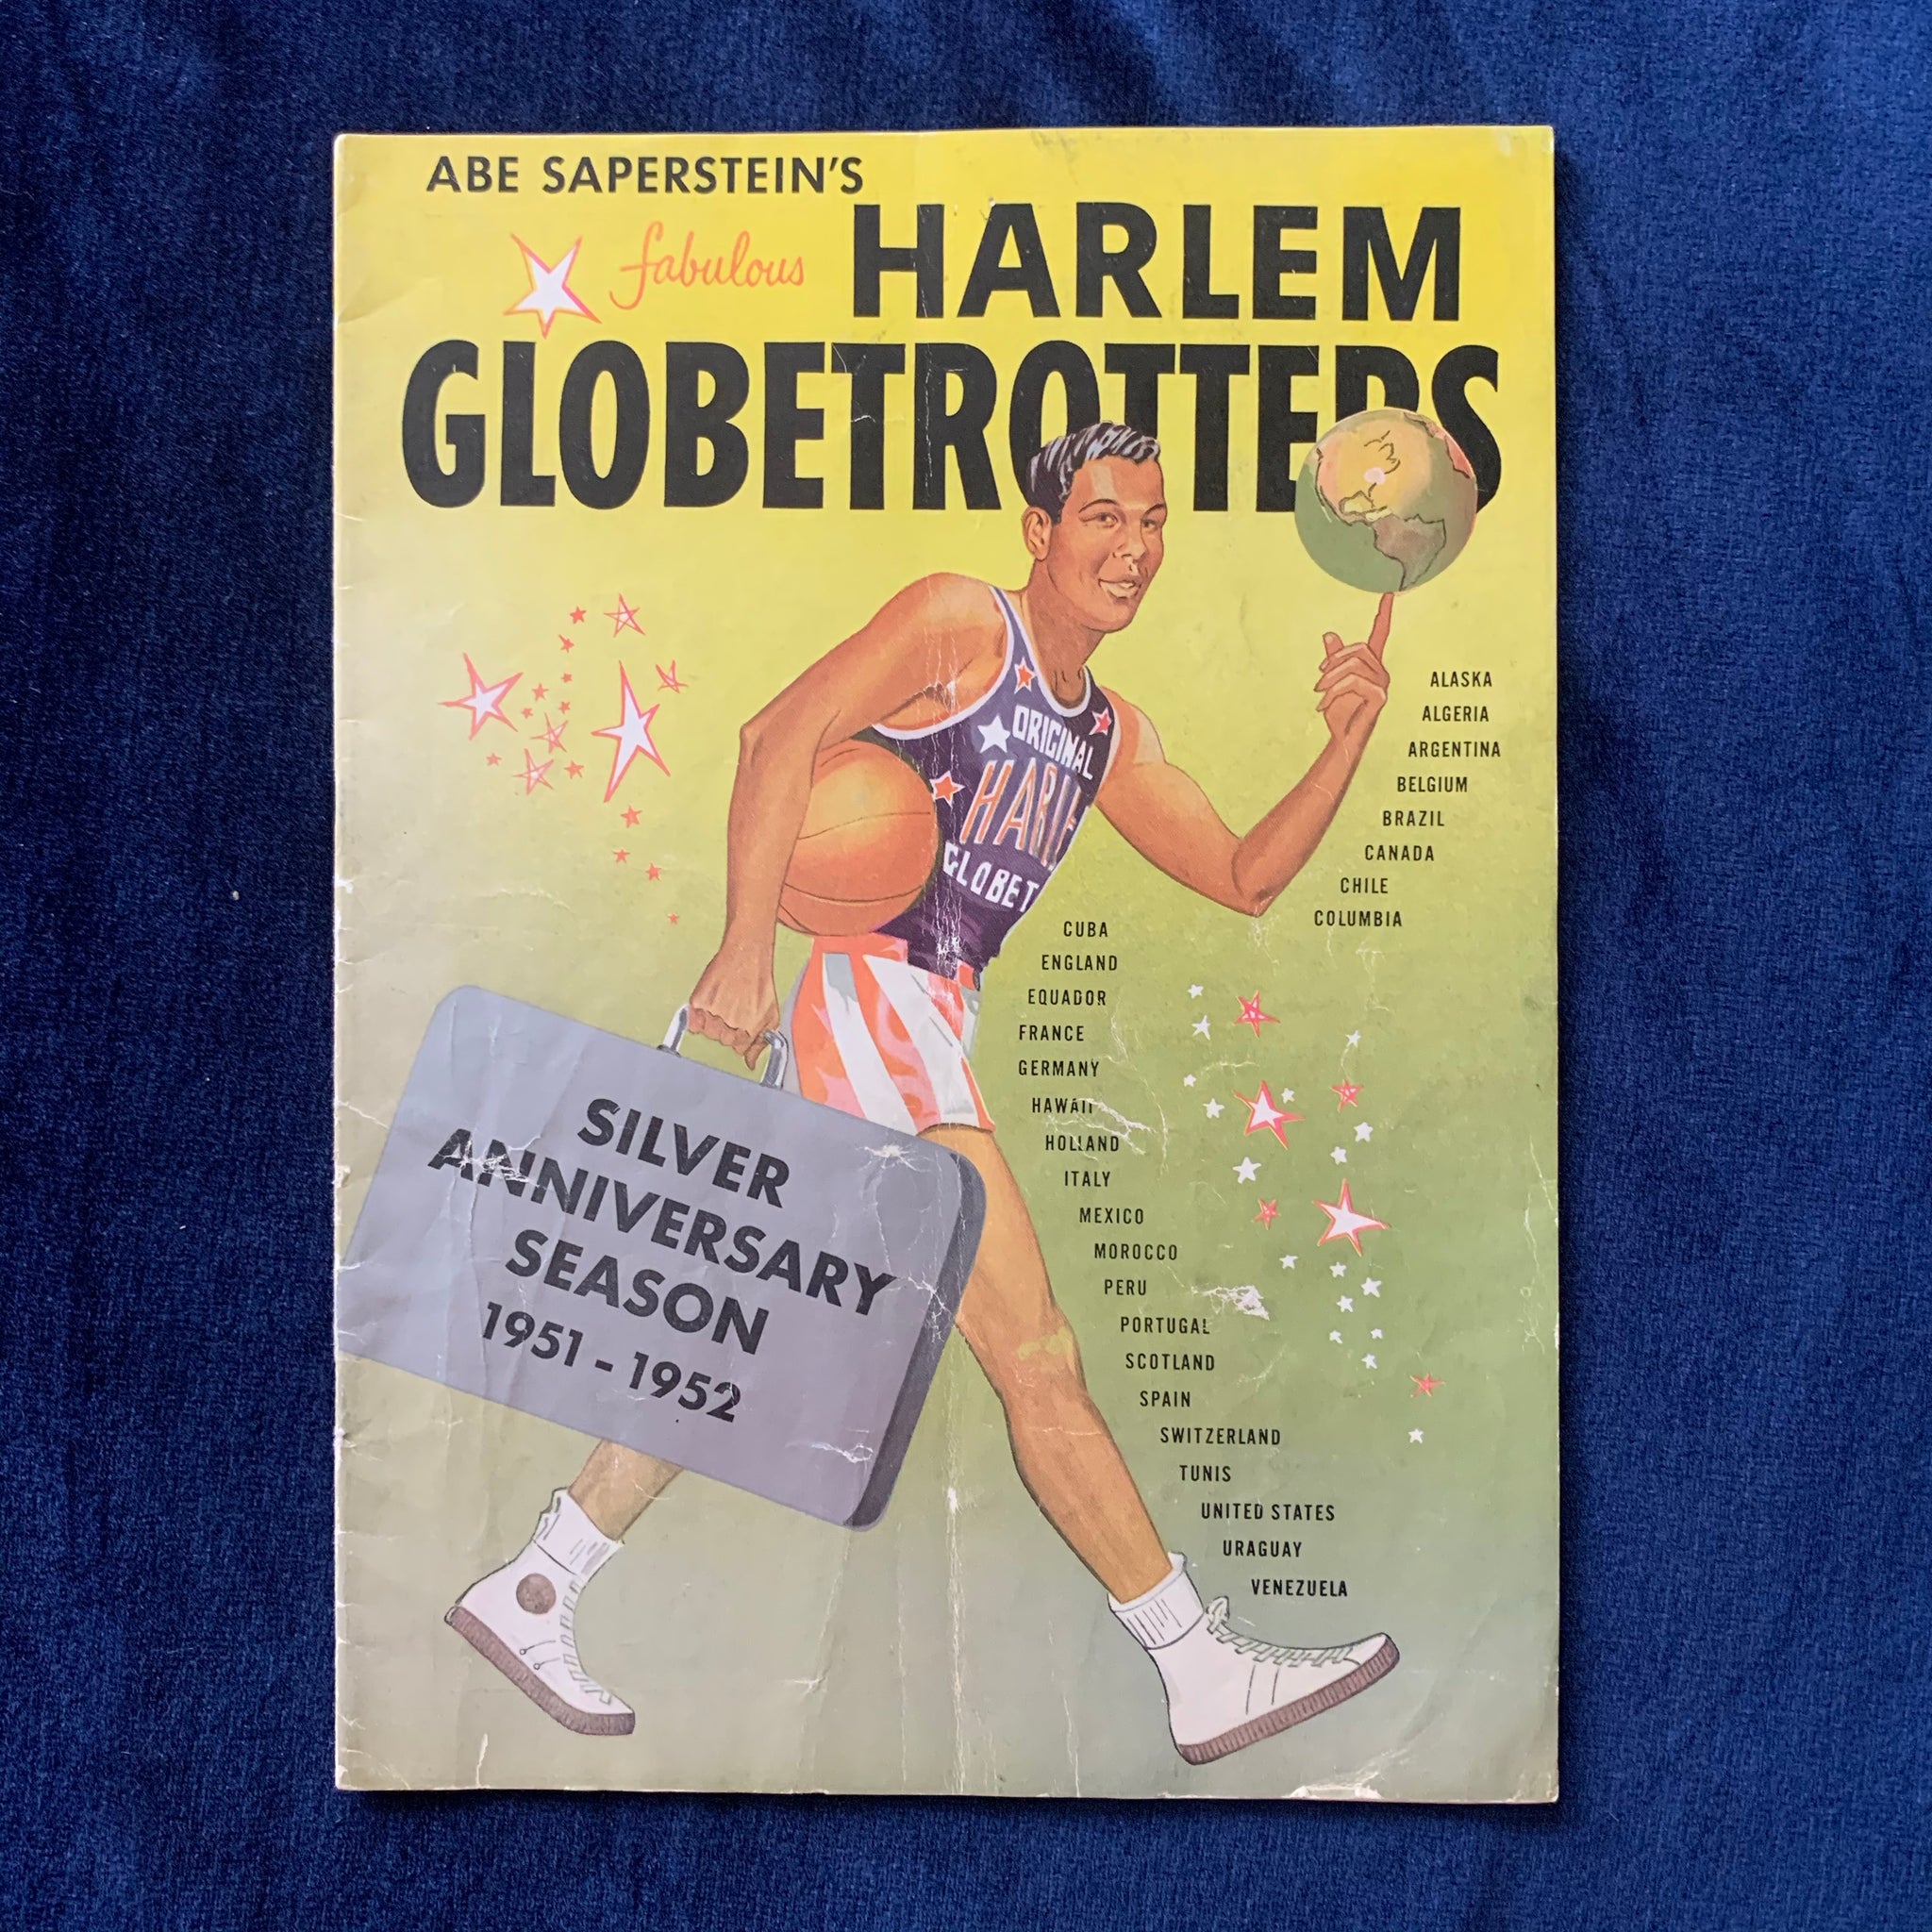 Harlem Globetrotters Silver Anniversary Edition